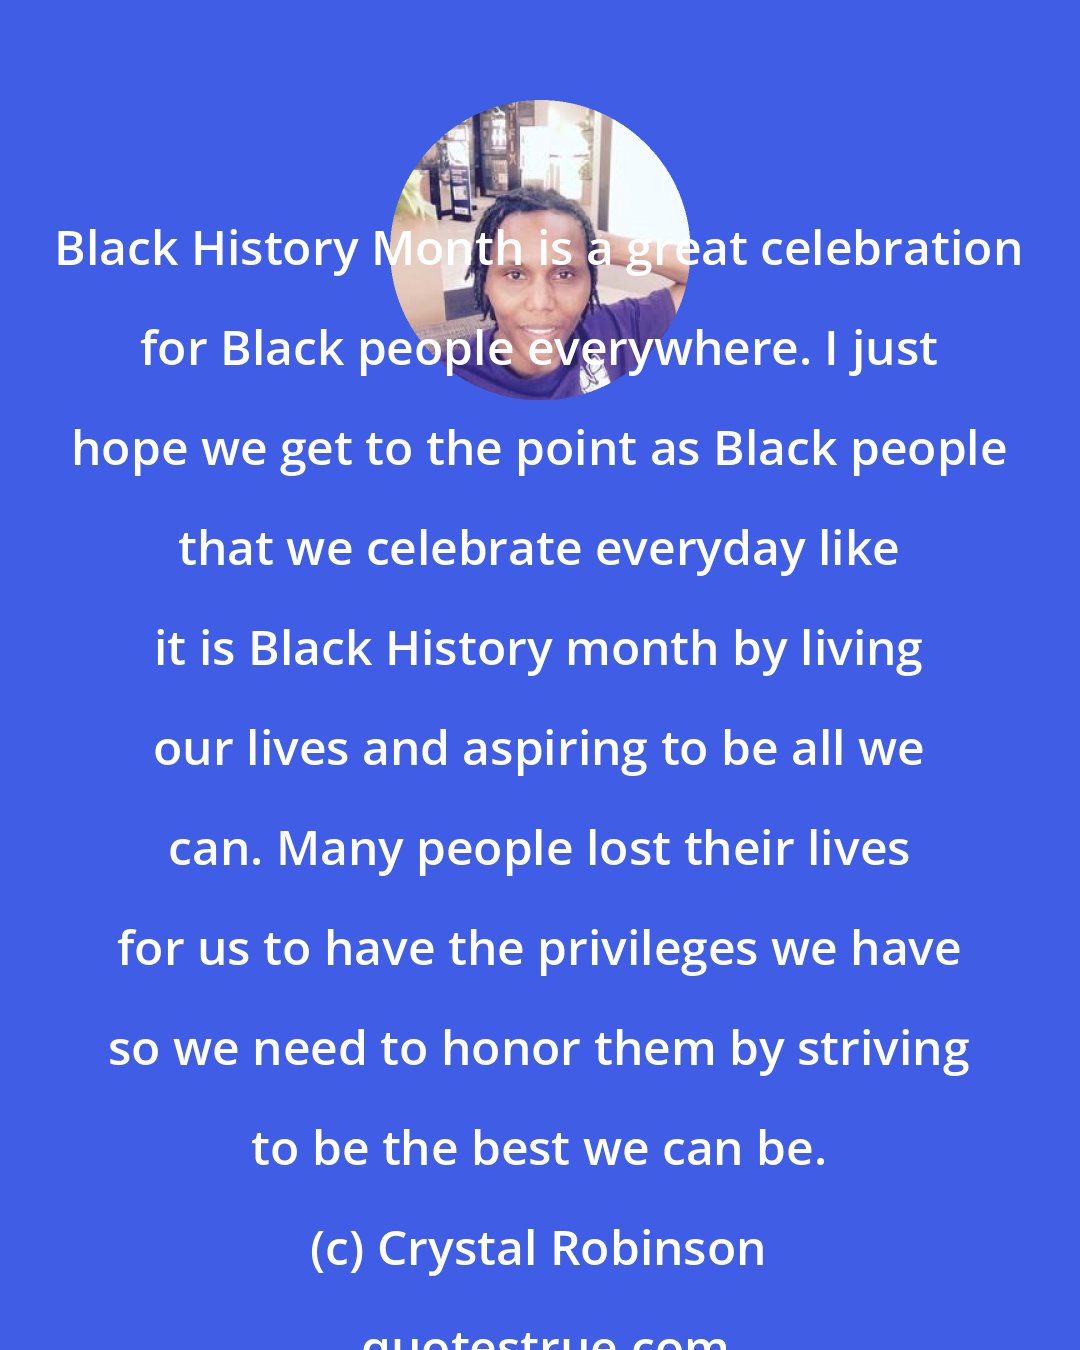 Crystal Robinson: Black History Month is a great celebration for Black people everywhere. I just hope we get to the point as Black people that we celebrate everyday like it is Black History month by living our lives and aspiring to be all we can. Many people lost their lives for us to have the privileges we have so we need to honor them by striving to be the best we can be.